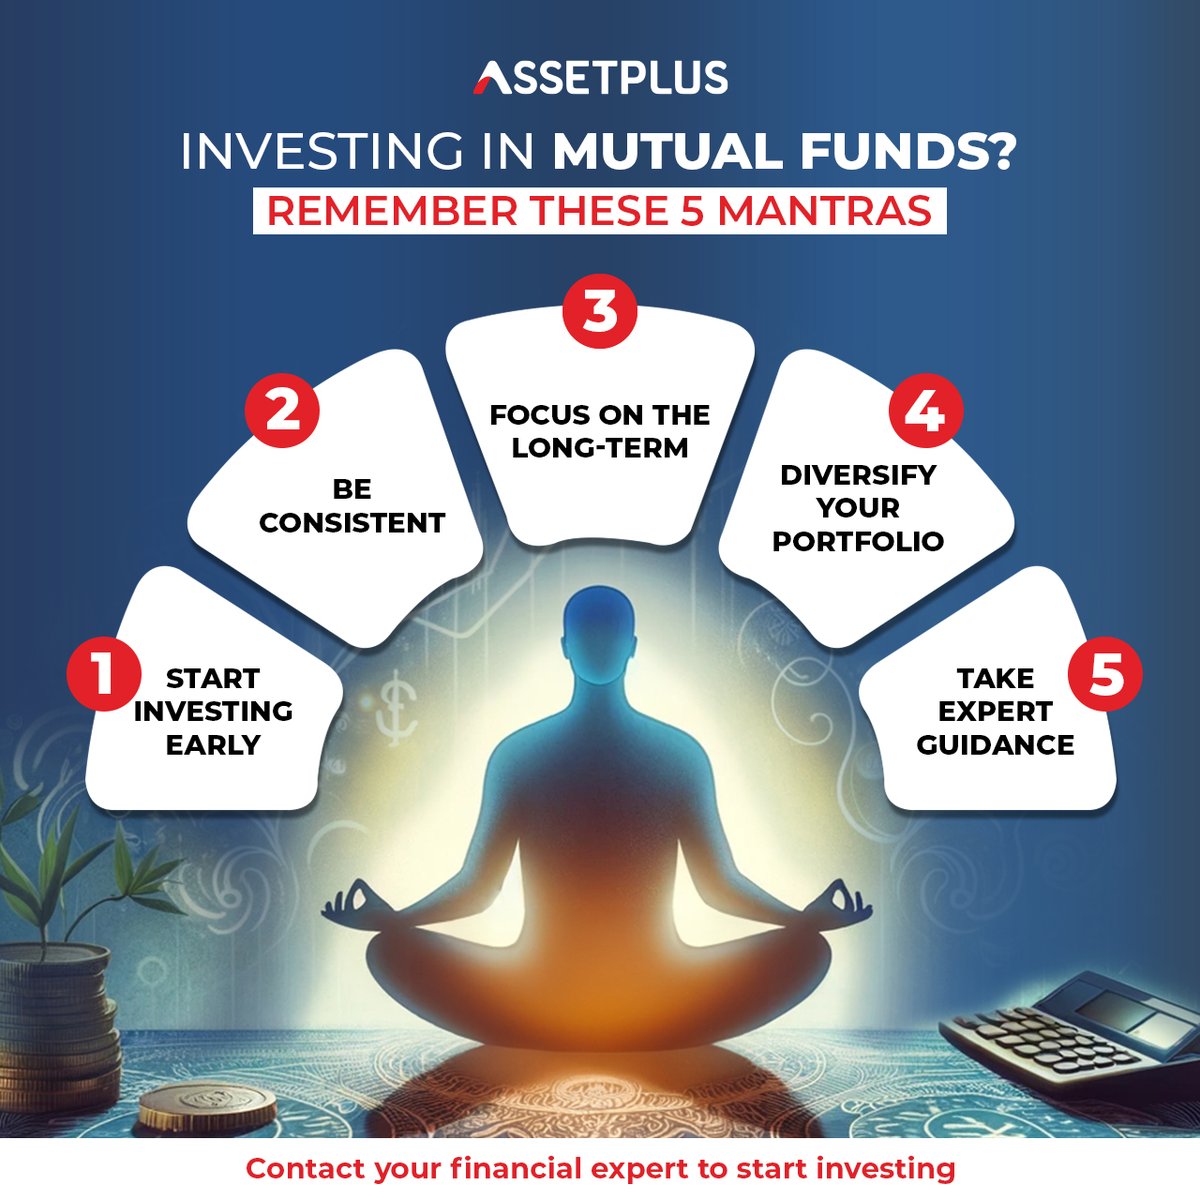 Here are 5 important mantras that will guide you toward a successful and rewarding investment journey.
#investmentplanning #financialexpert